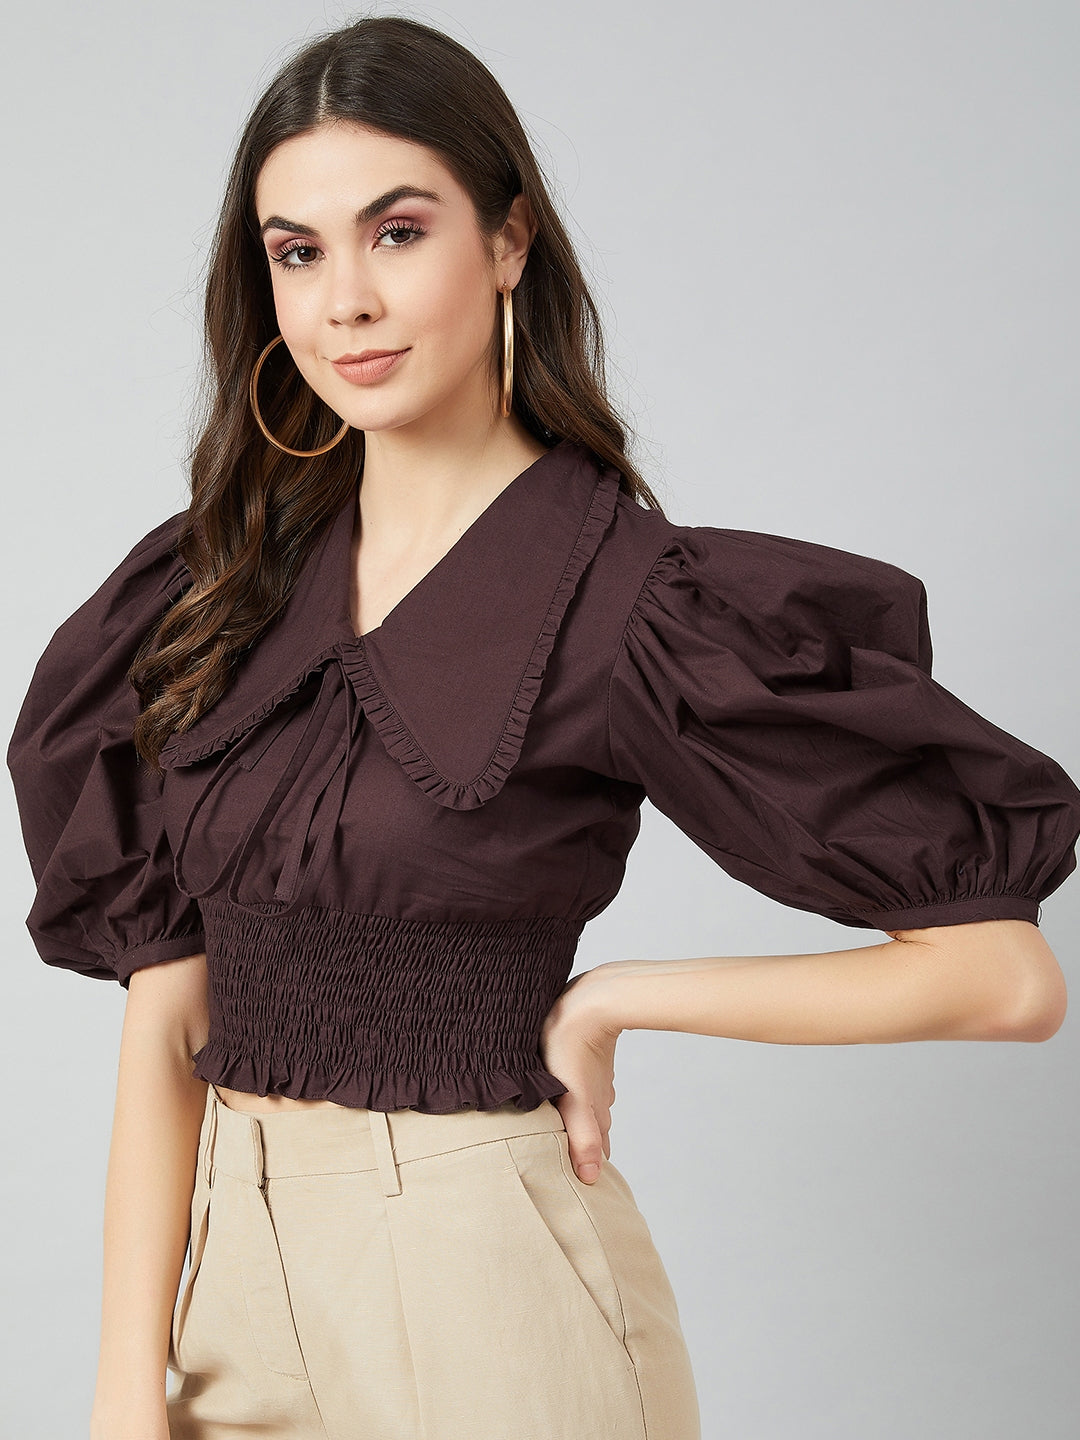 Athena Coffee Brown Tie-Up Neck Puff Sleeves Smocked Pure Cotton Top - Athena Lifestyle